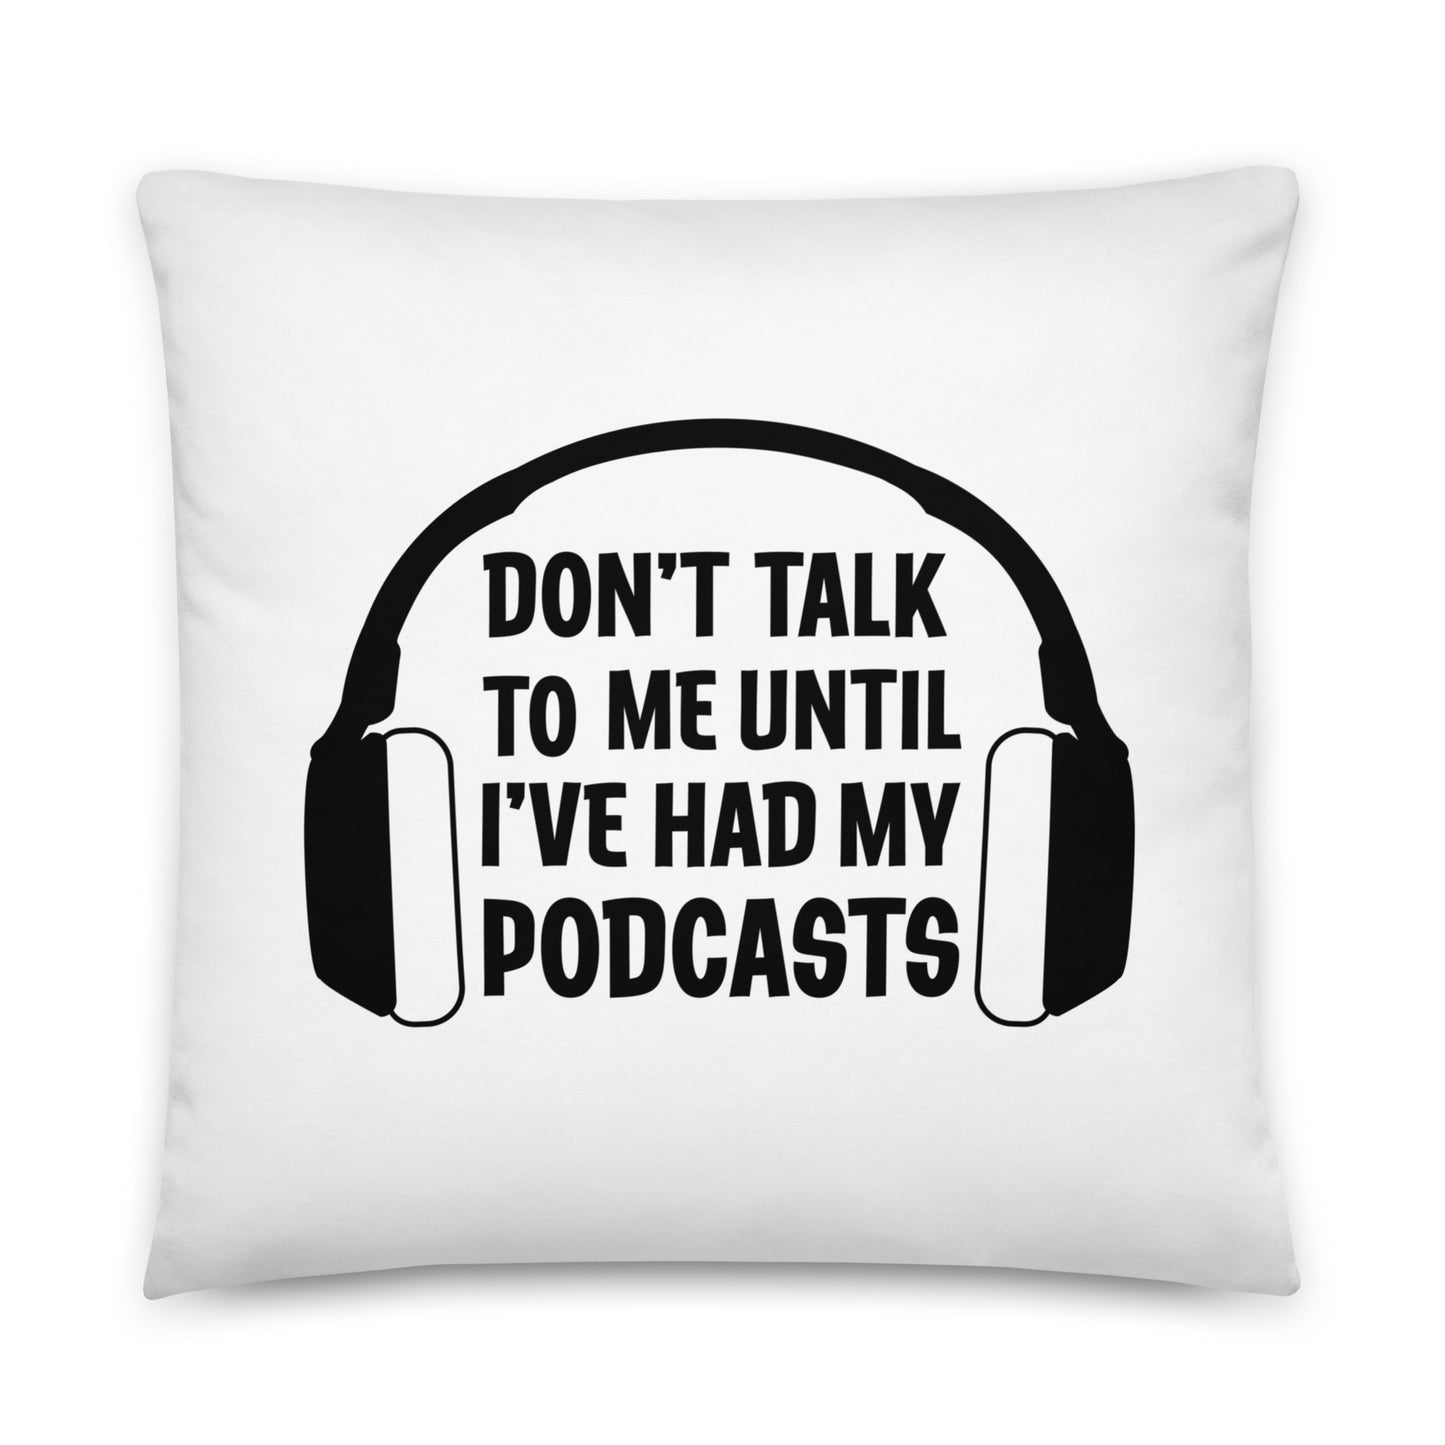 22 inch by 22 inch pillow with image of headphones and text reading "Don't talk to me until I've had my podcasts"